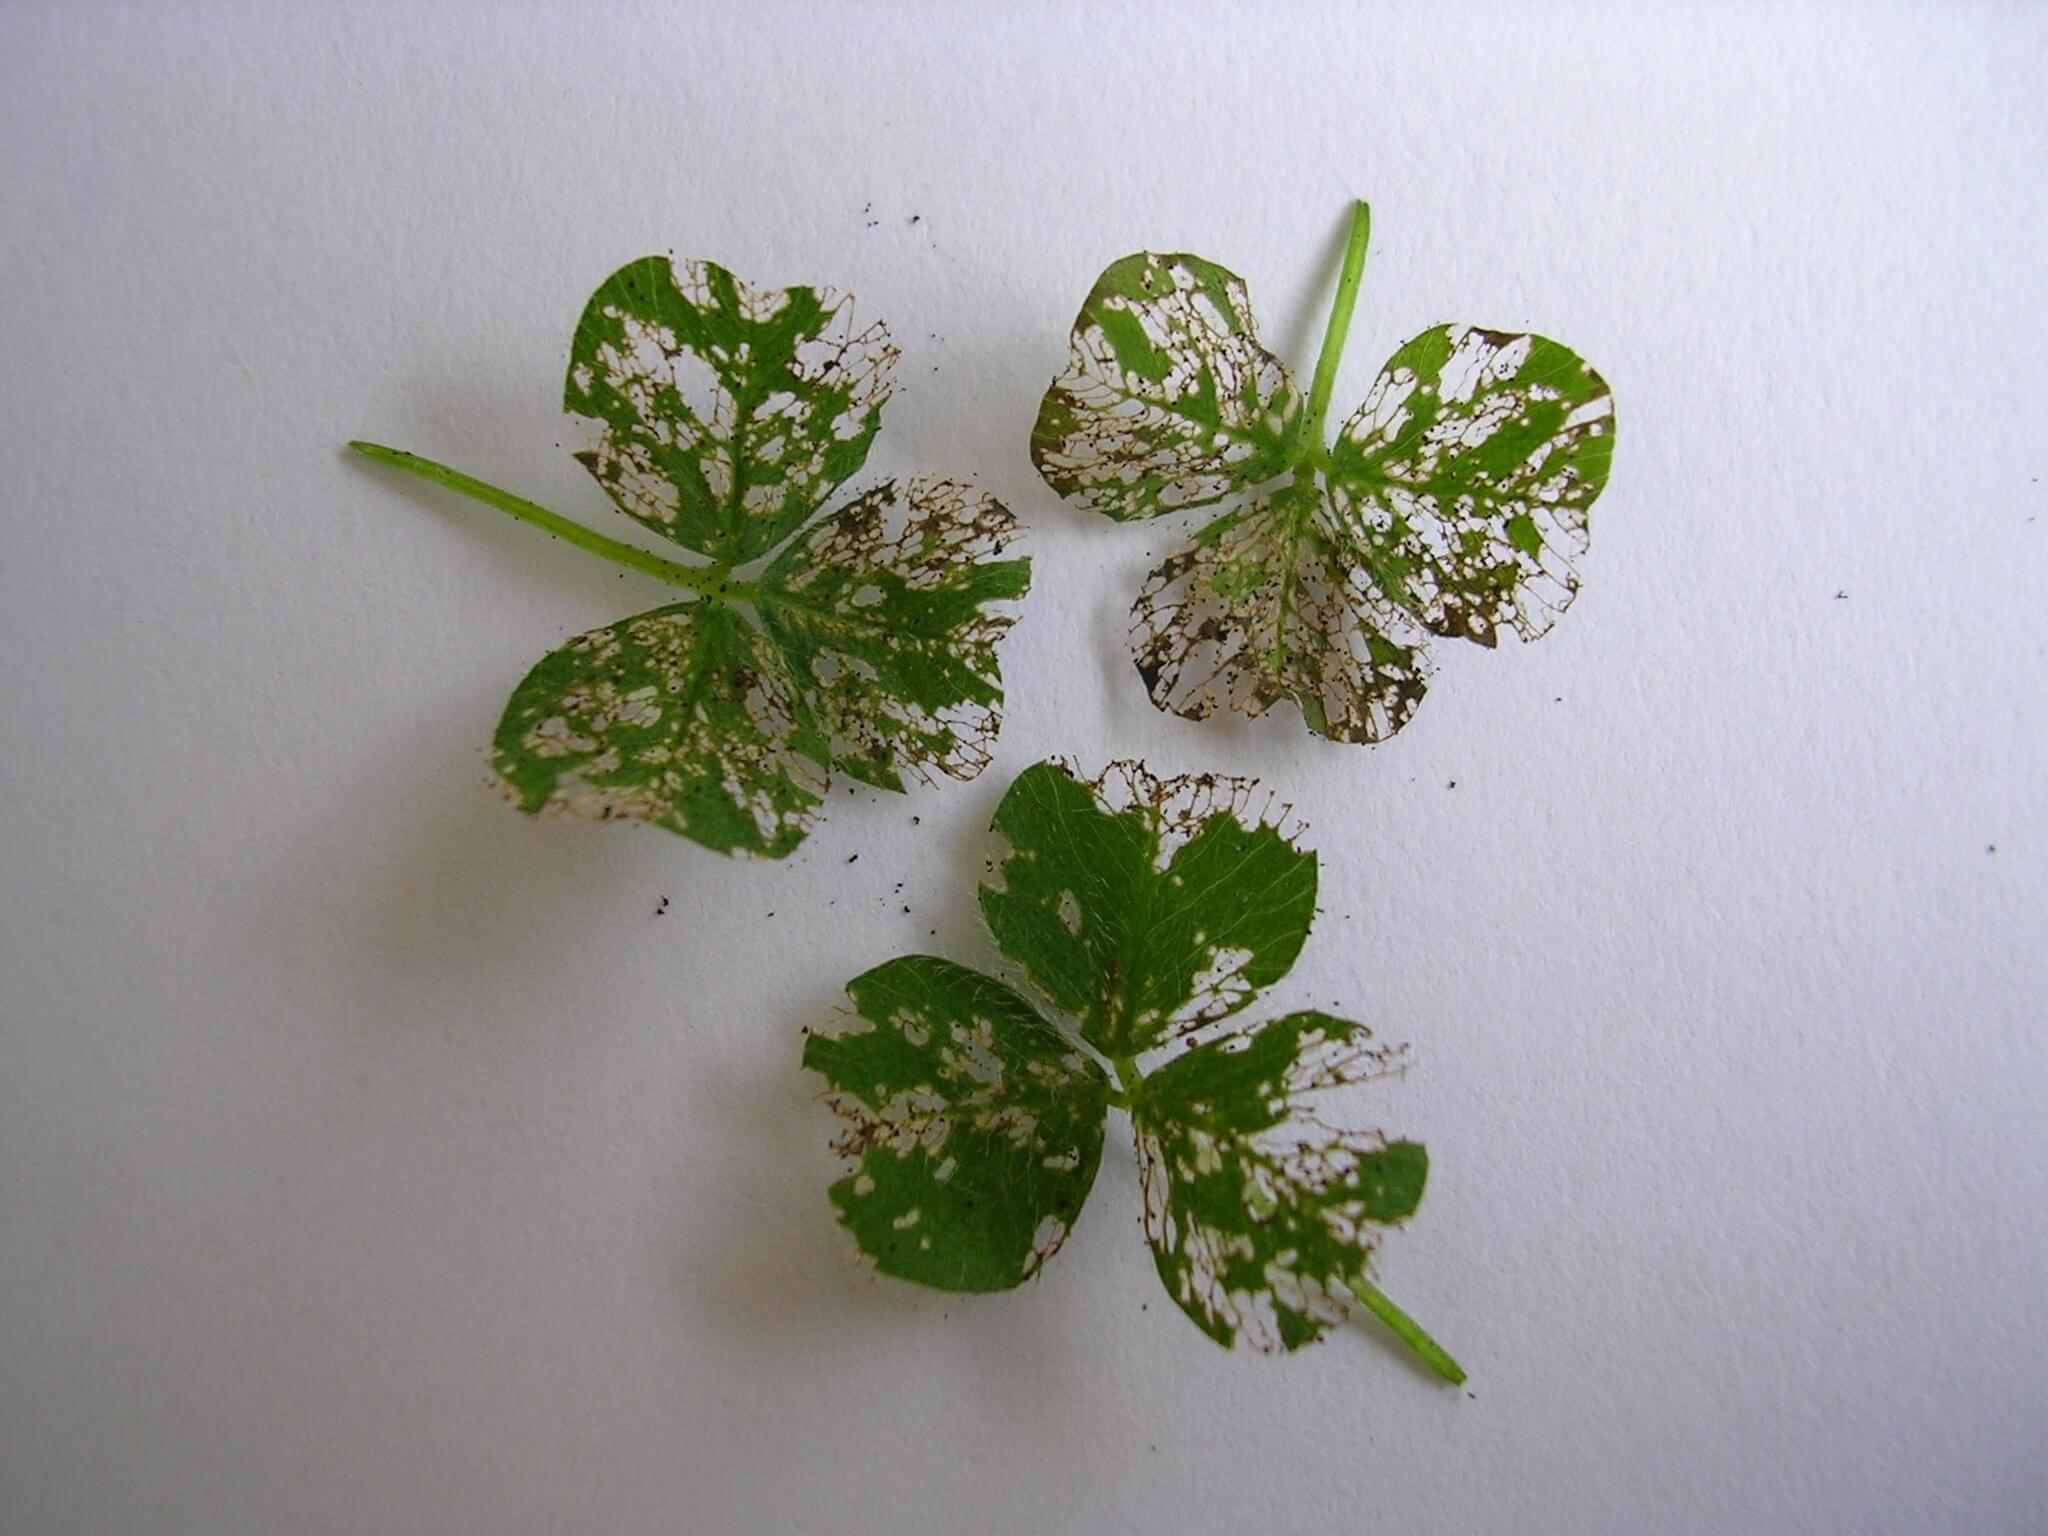 Photo showing feeding damage caused by lucerne flea to clover leaves, which are holes in the leaf tissue. 